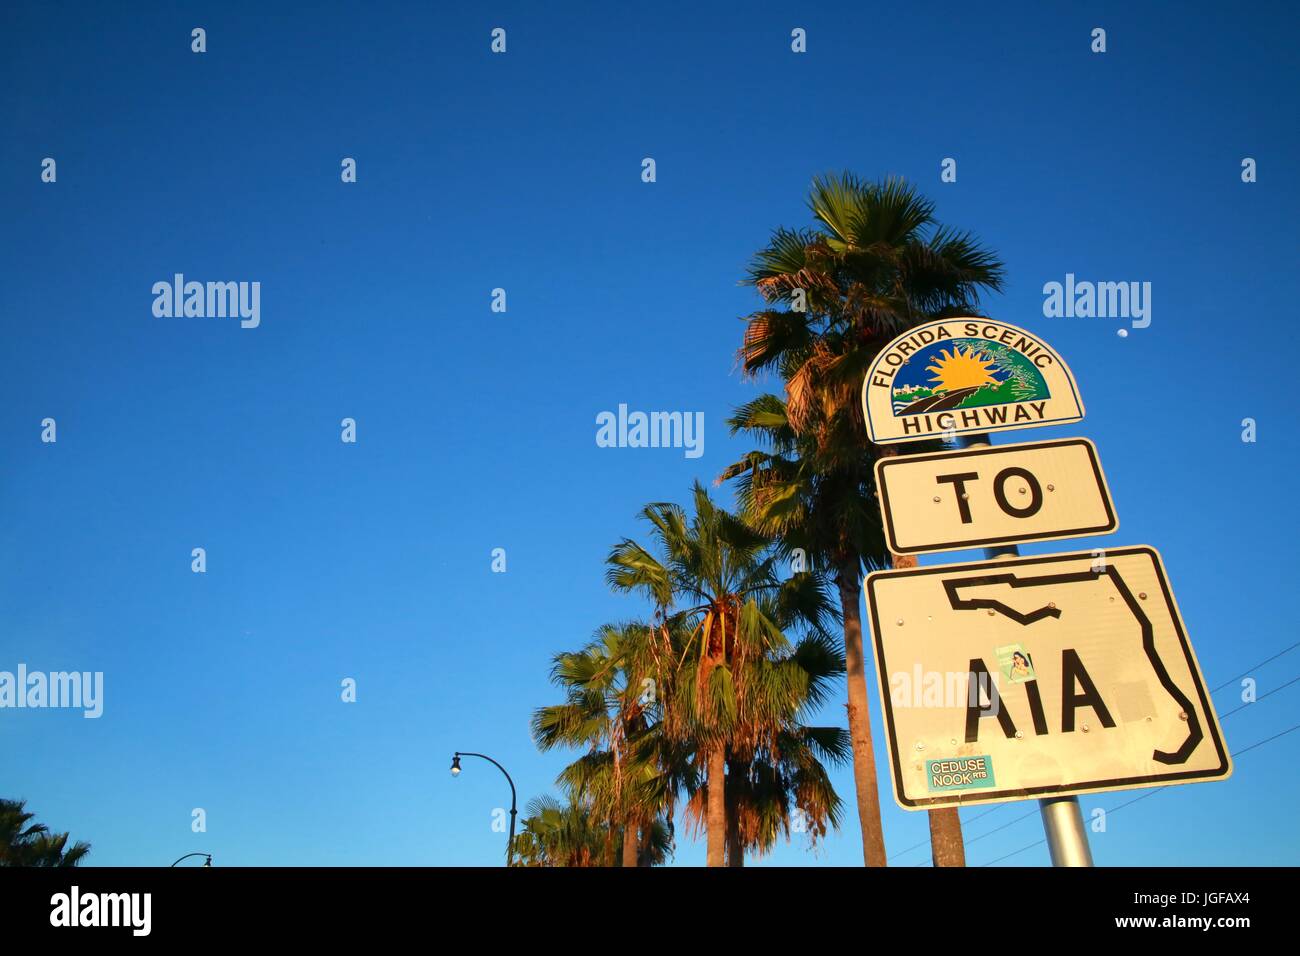 Florida Scenic Highway to A1A Sign at Sunset Beneath Palm Trees in Deerfield Beach on Hillsboro Boulevard West of Intracoastal Waterway Bridge Stock Photo